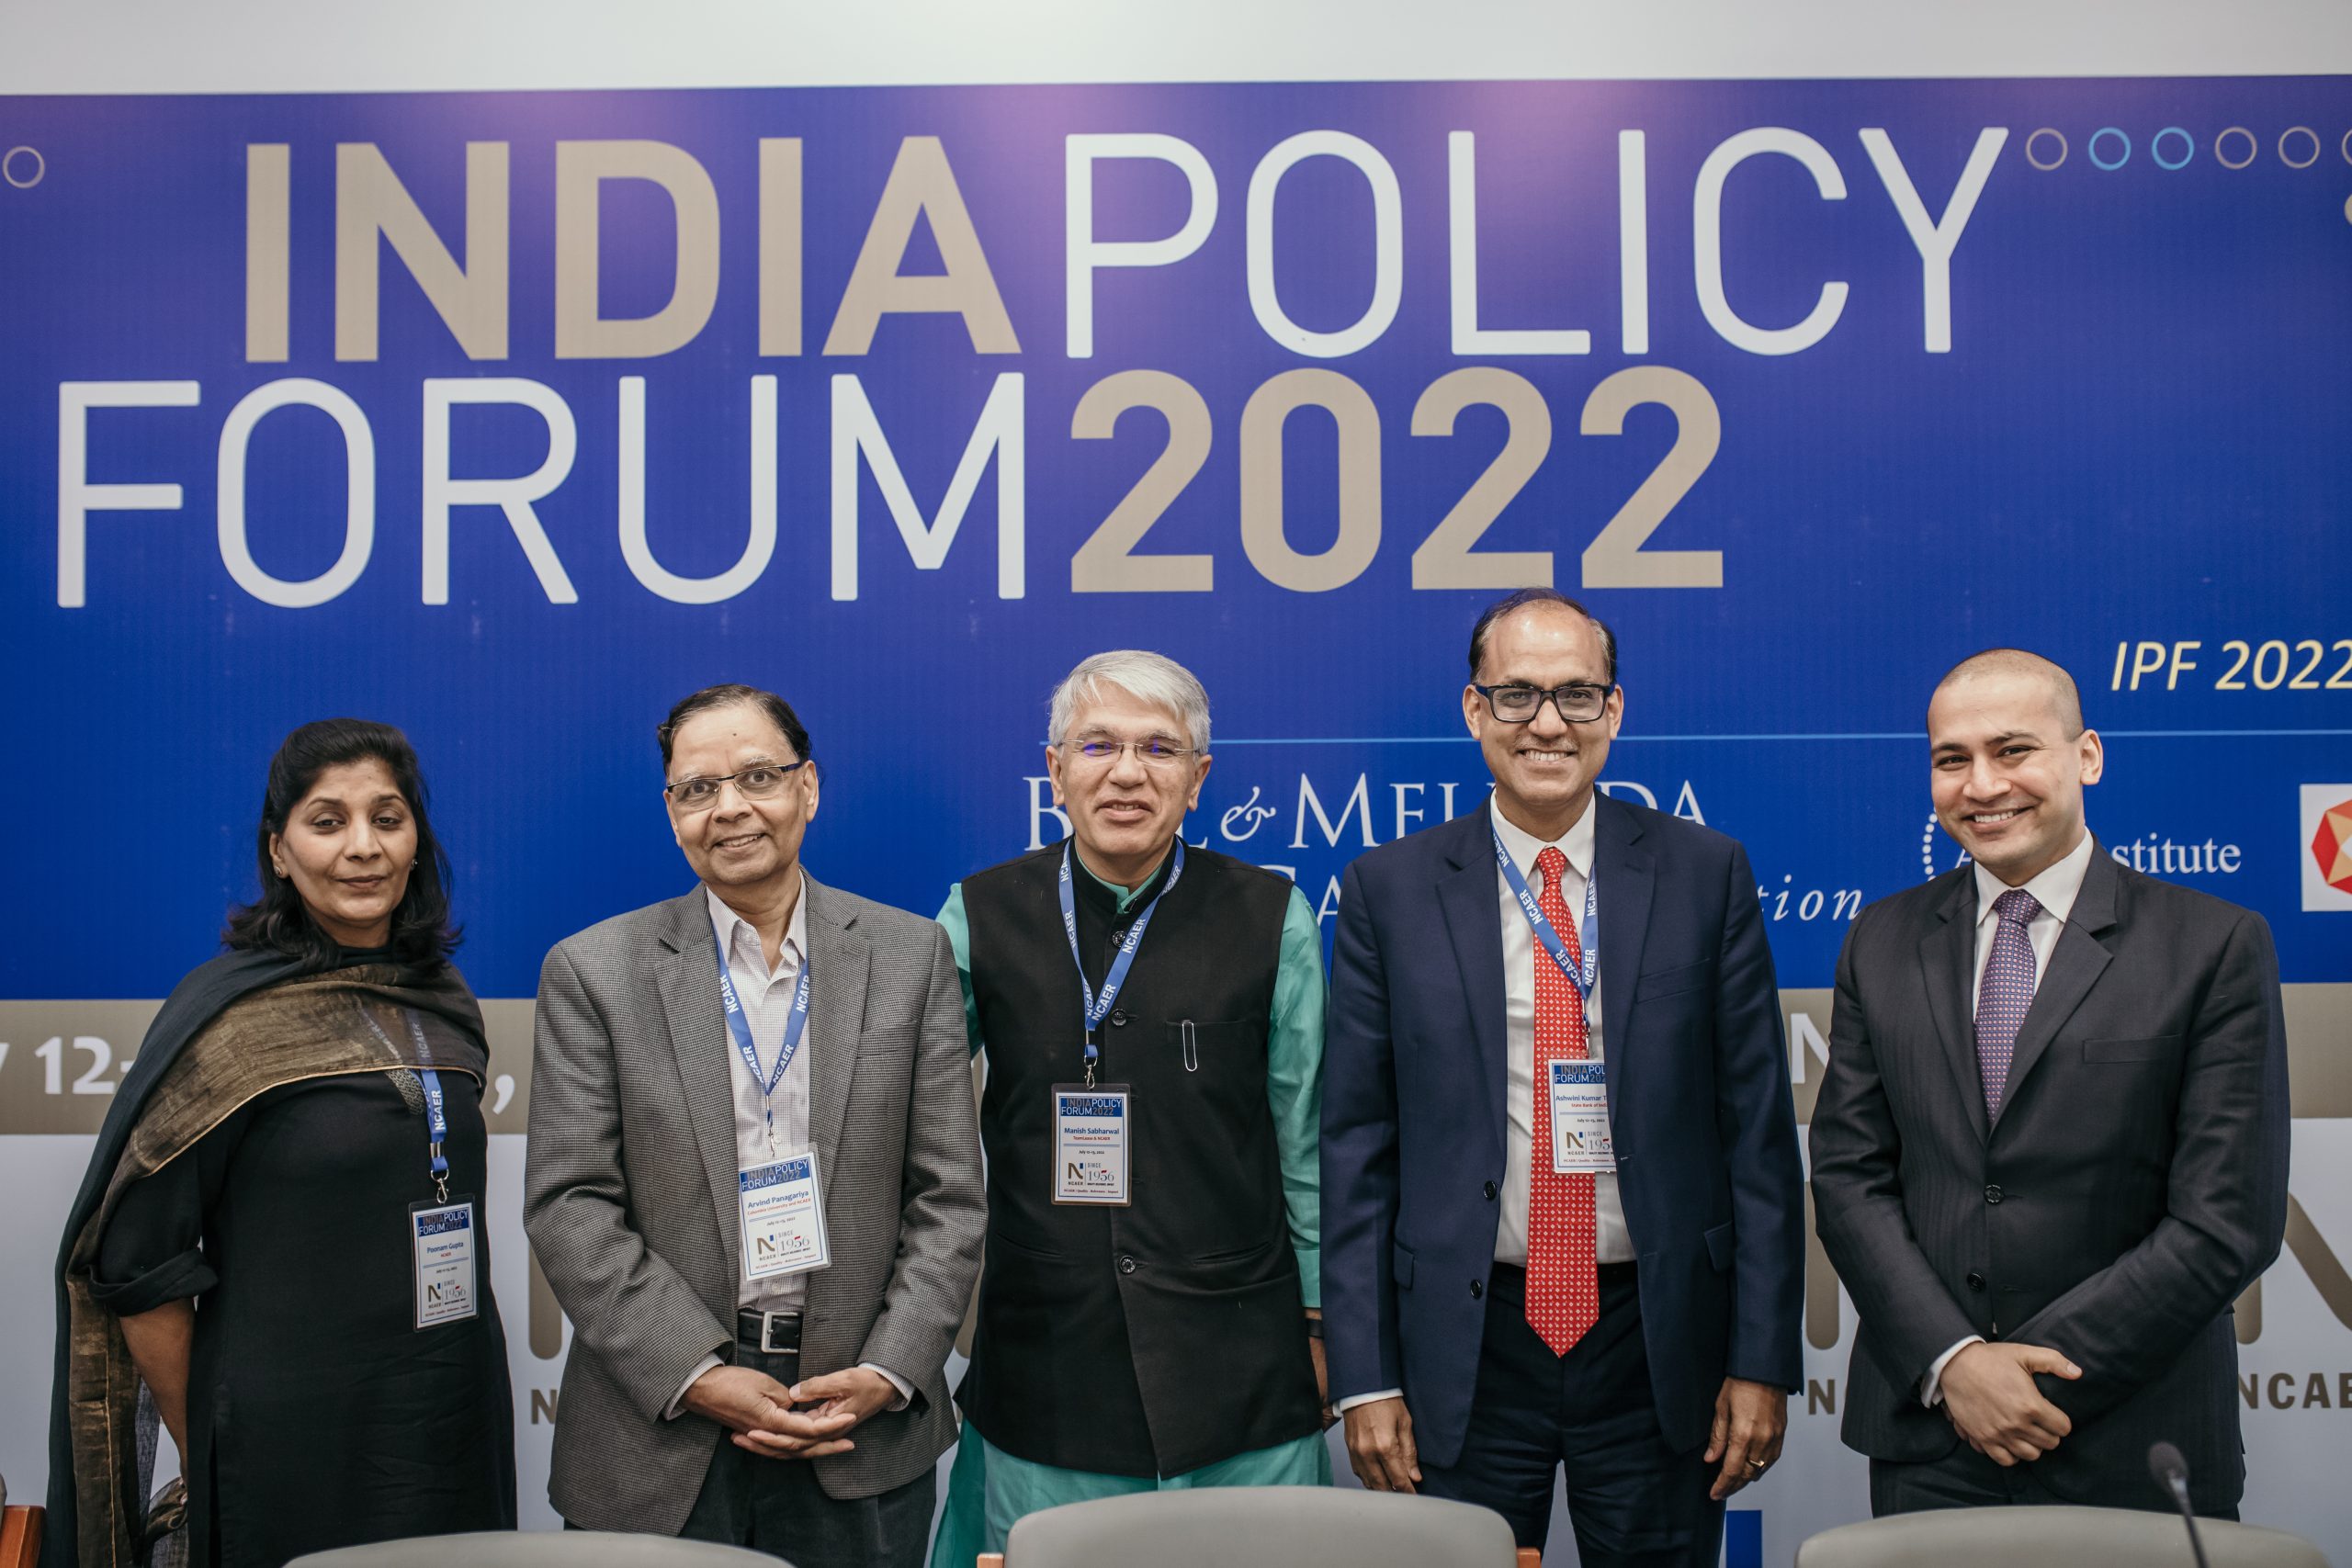 The India Policy Forum 2022